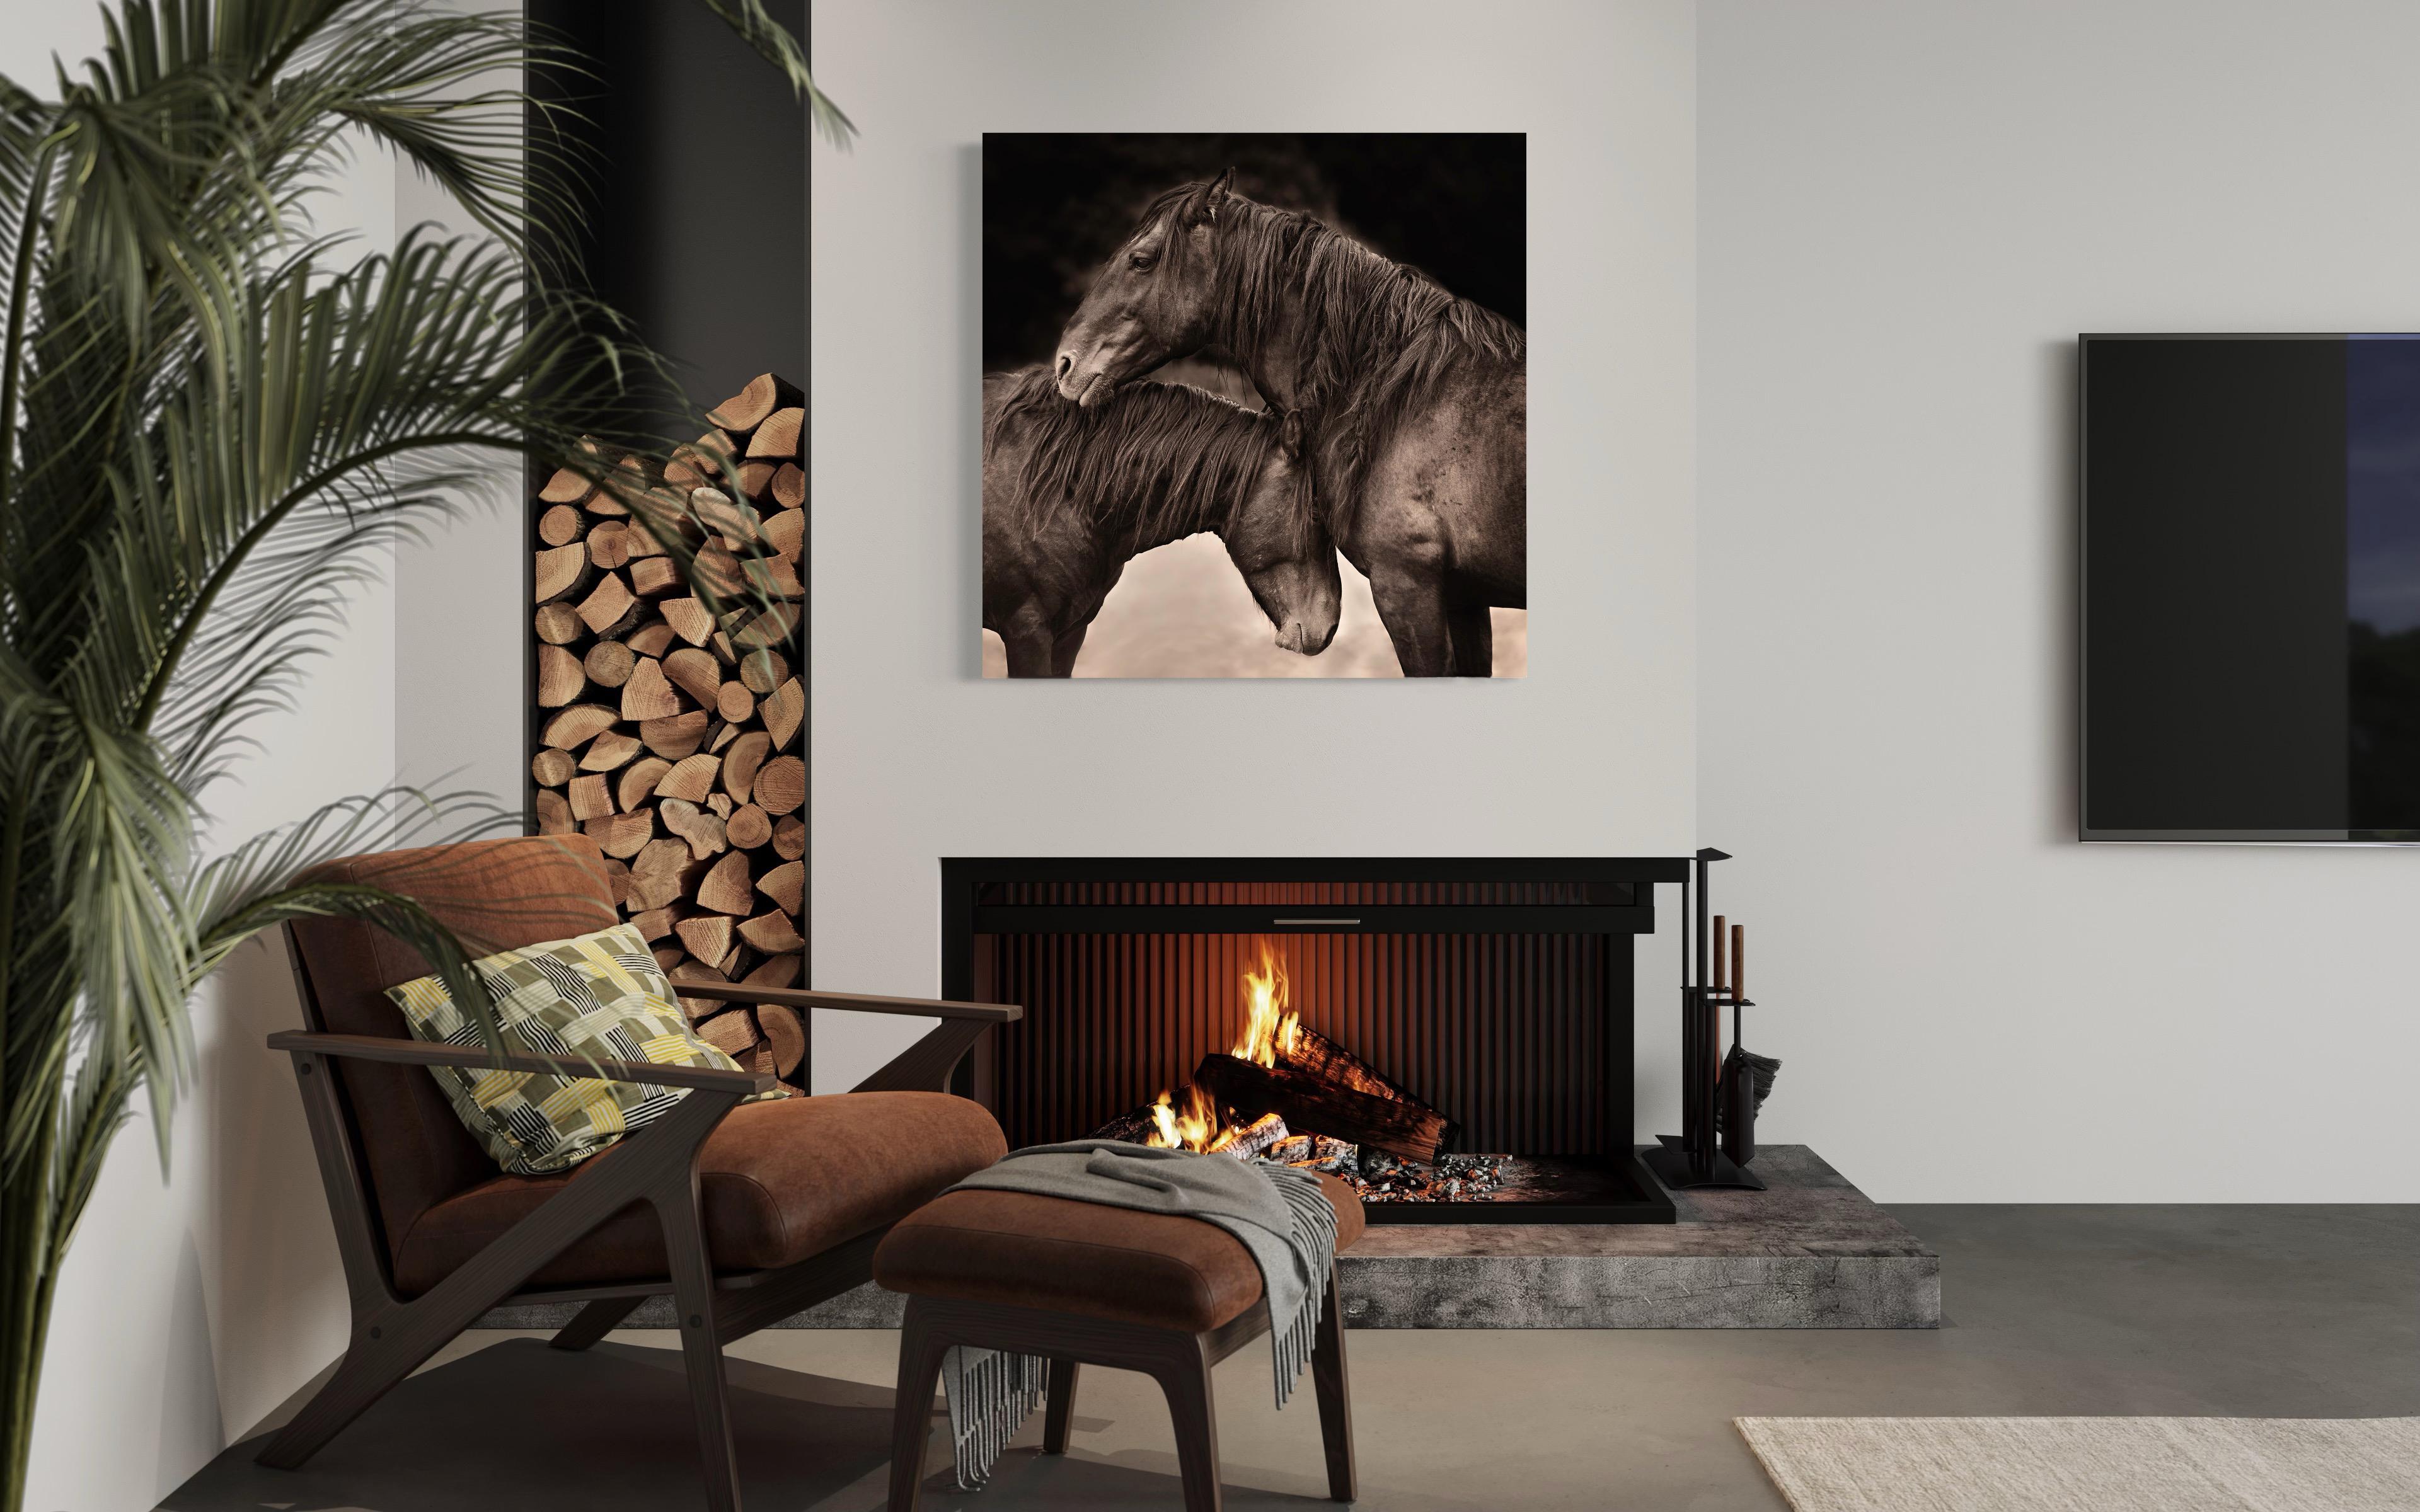 This black and white contemporary photograph by Tori Gagne captures a close-up view of two wild horses embracing. An edition size of 50, this photograph is available as a metal sublimation print with a 1.3” deep silver flush mount frame and white